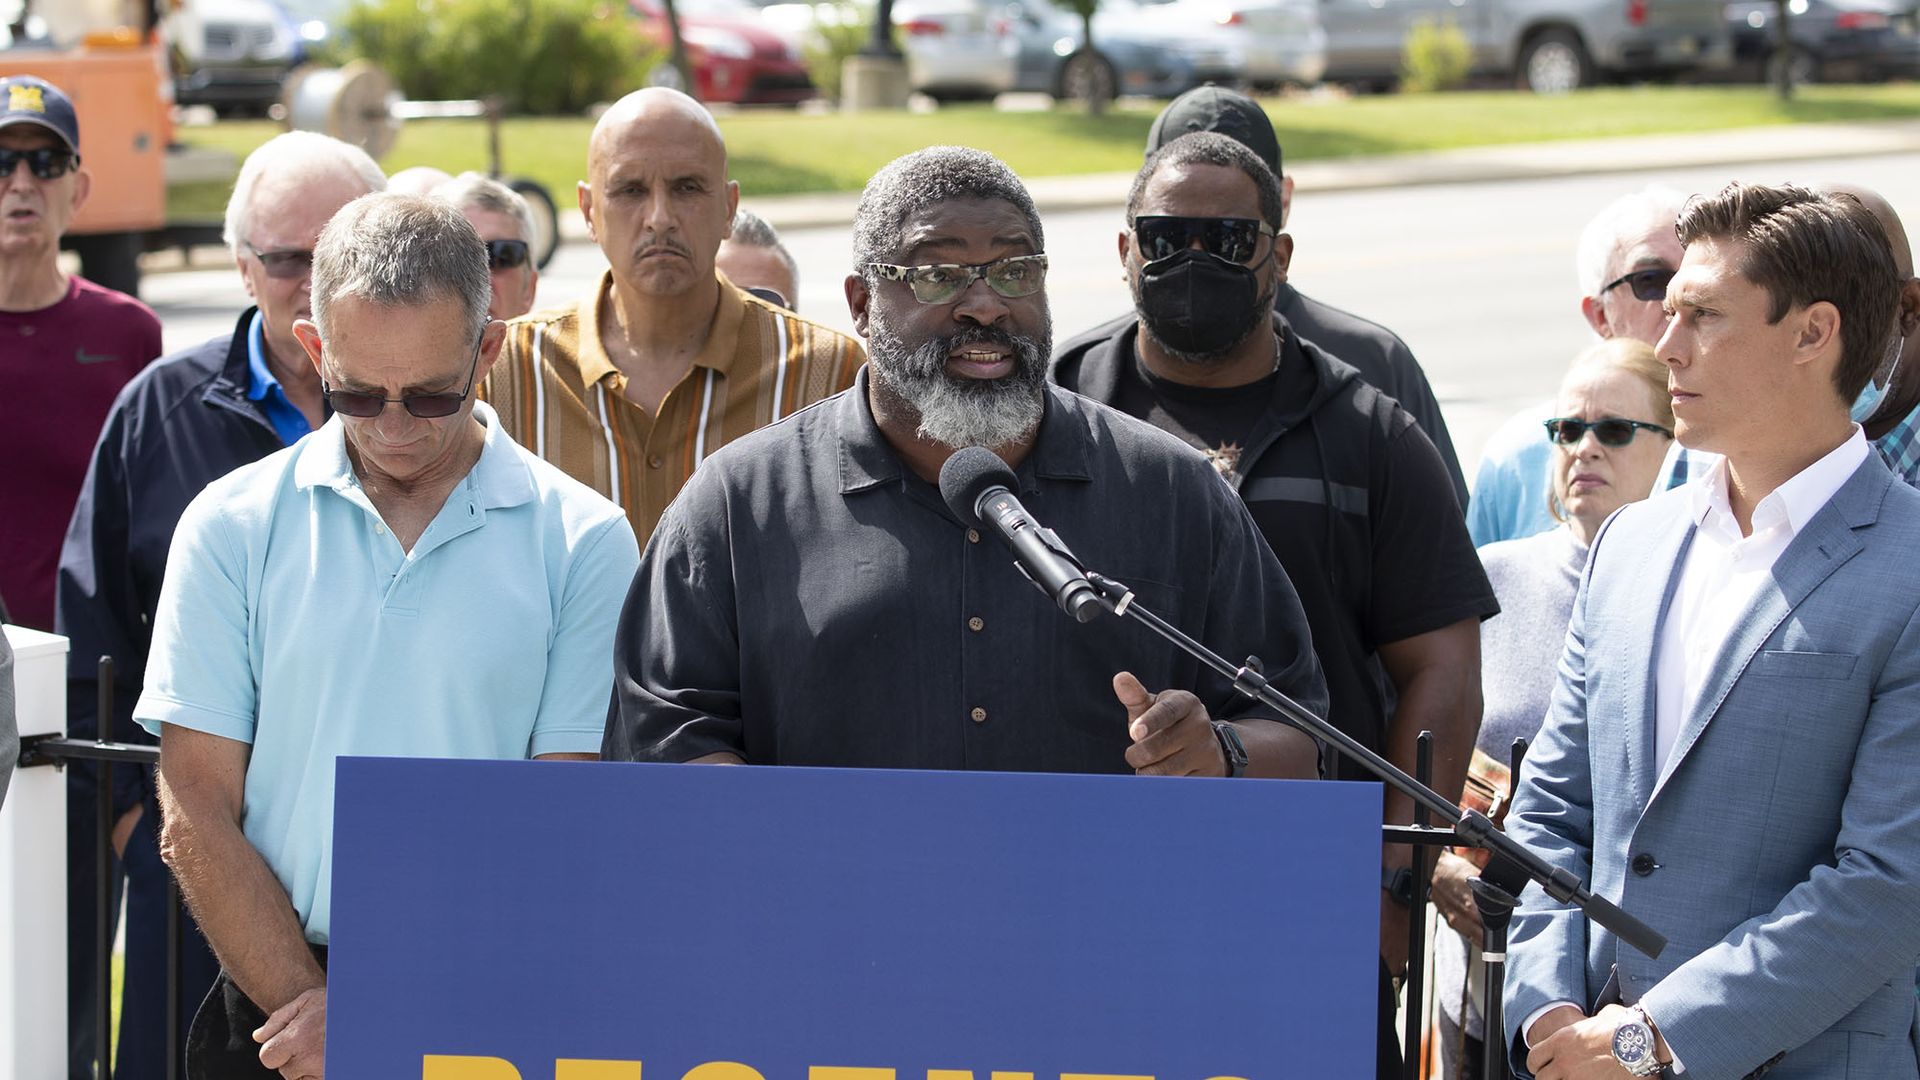 on Vaughn, former University of Michigan and former NFL football player, speaks at a press conference on the University of Michigan campus on June 16, 2021 in Ann Arbor, Michigan.